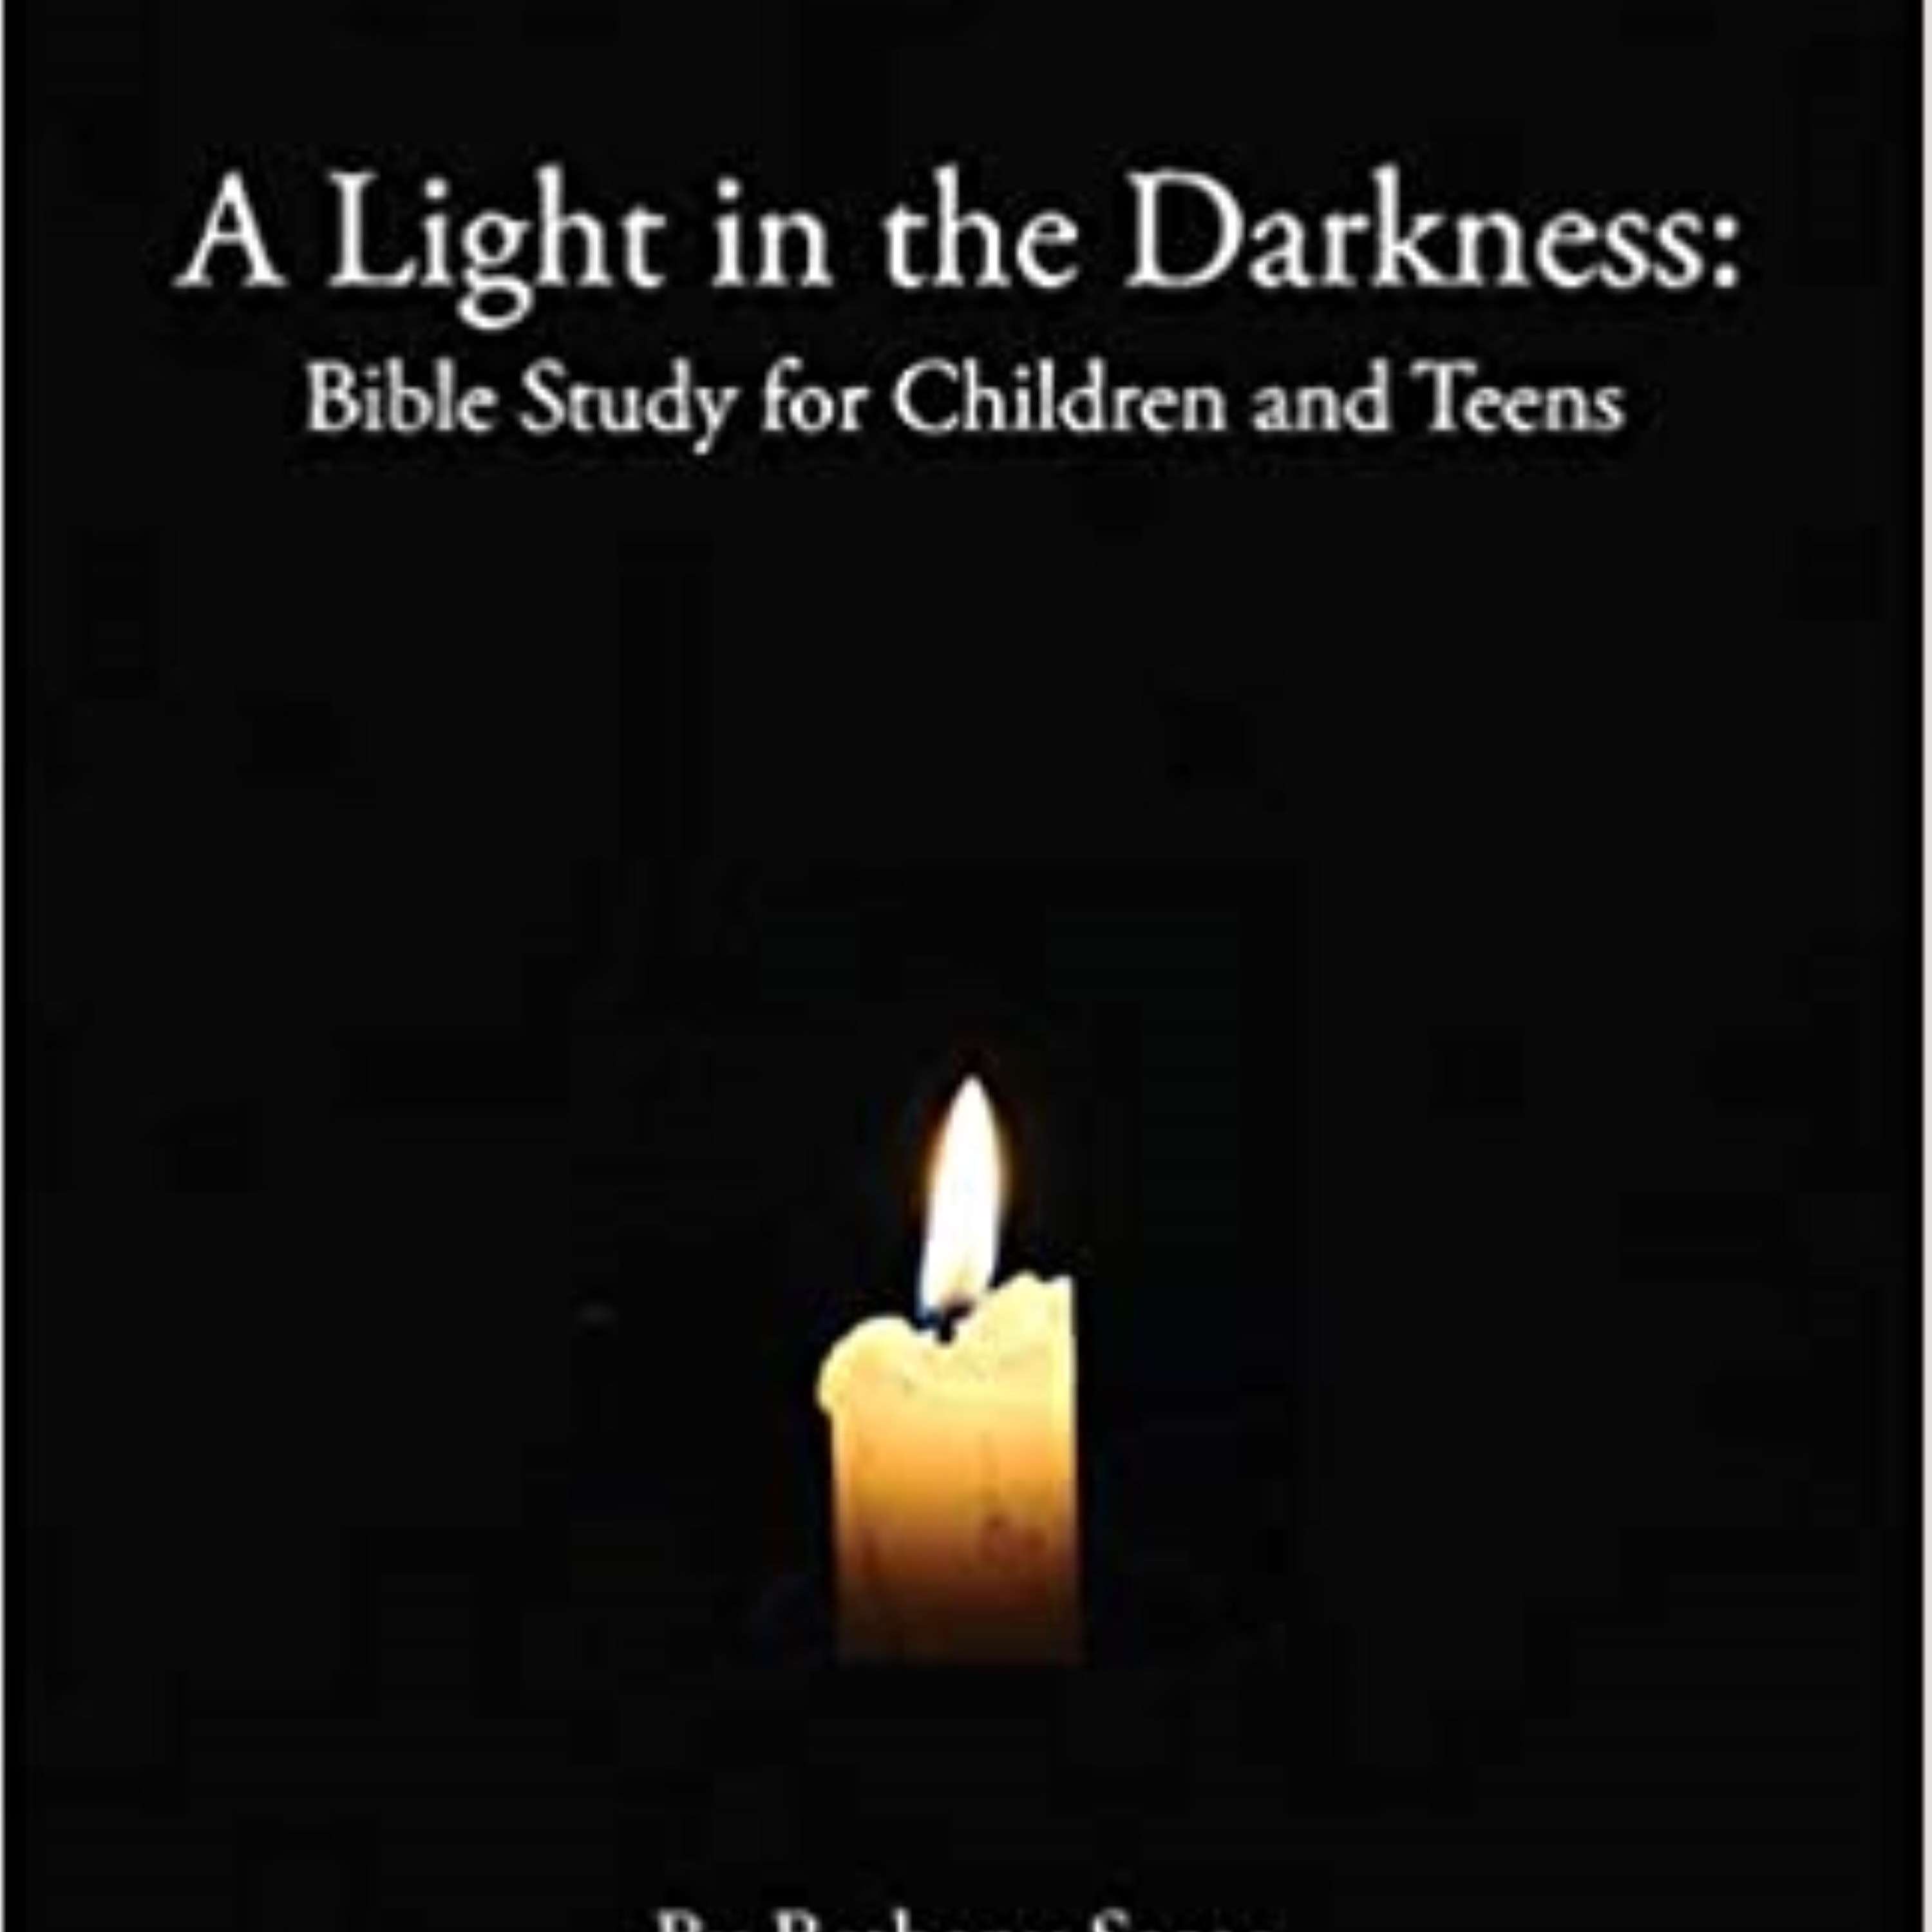 Bethany Saros on her book, "A Light in the Darkness: Bible Study for Children and Teens"